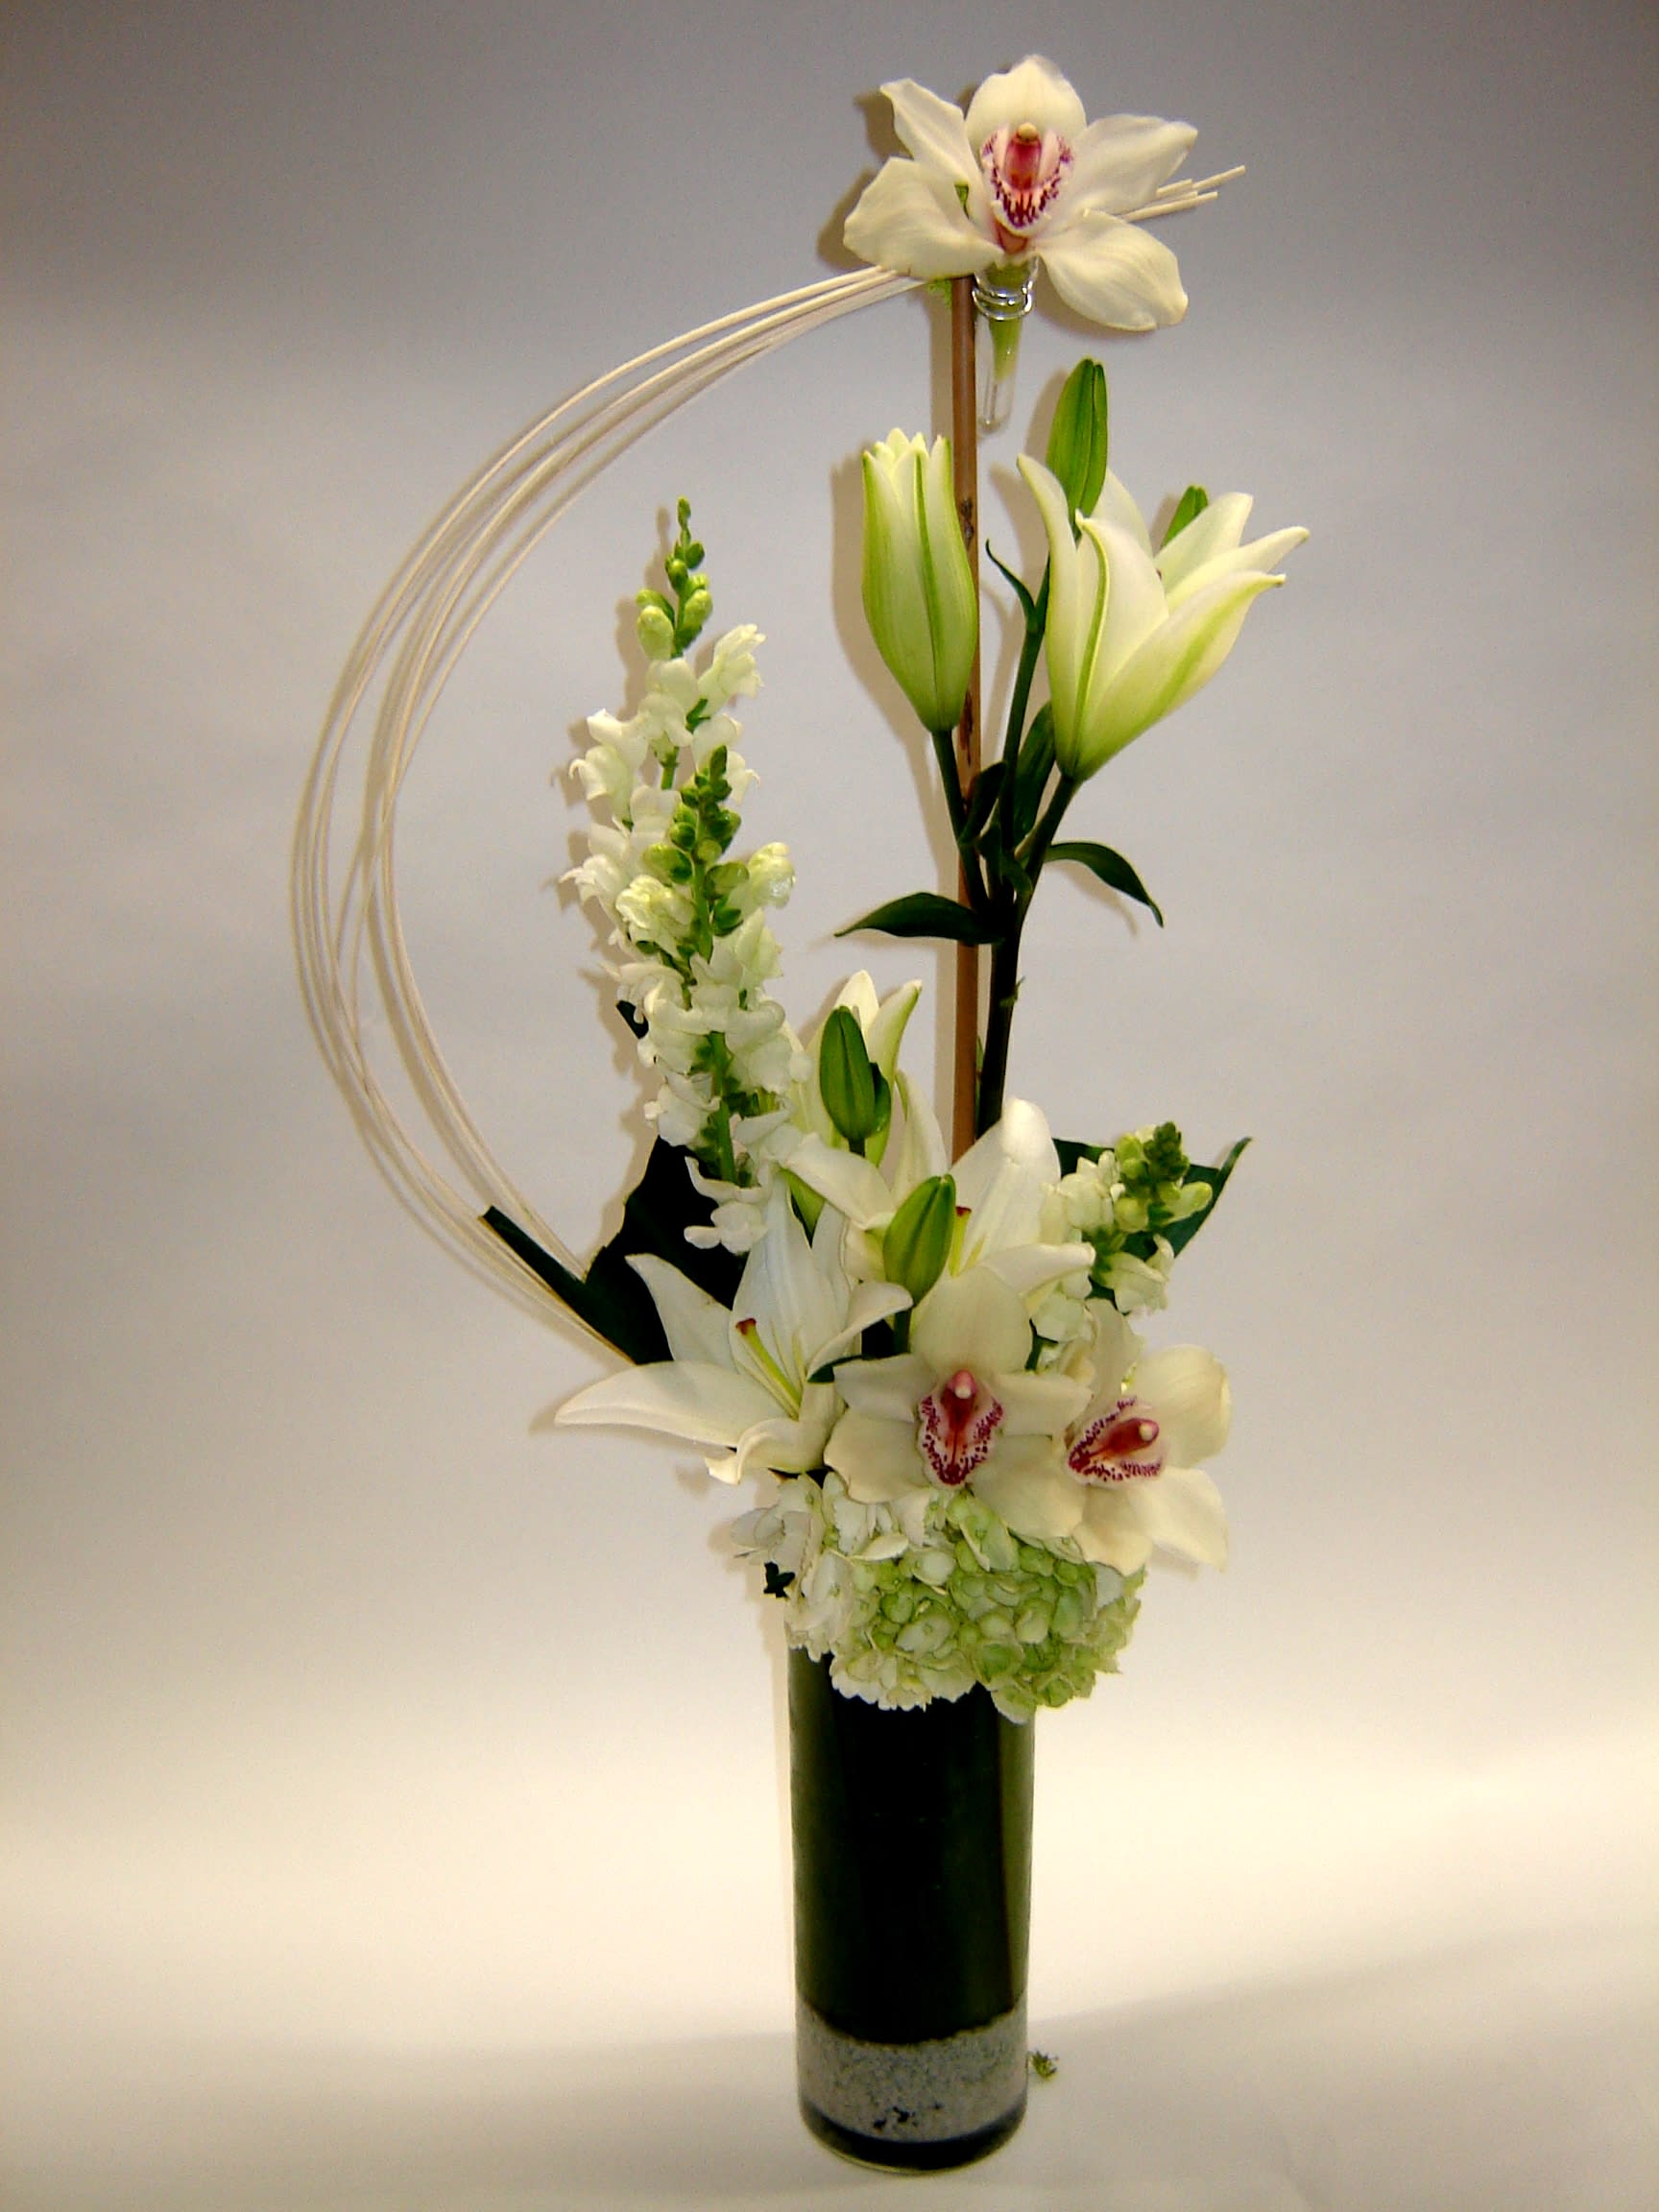 White Modernity - A gravity defying, modern arrangement with white cymbidium orchids, Casablanca lilies, snapdragons and hydrangea.